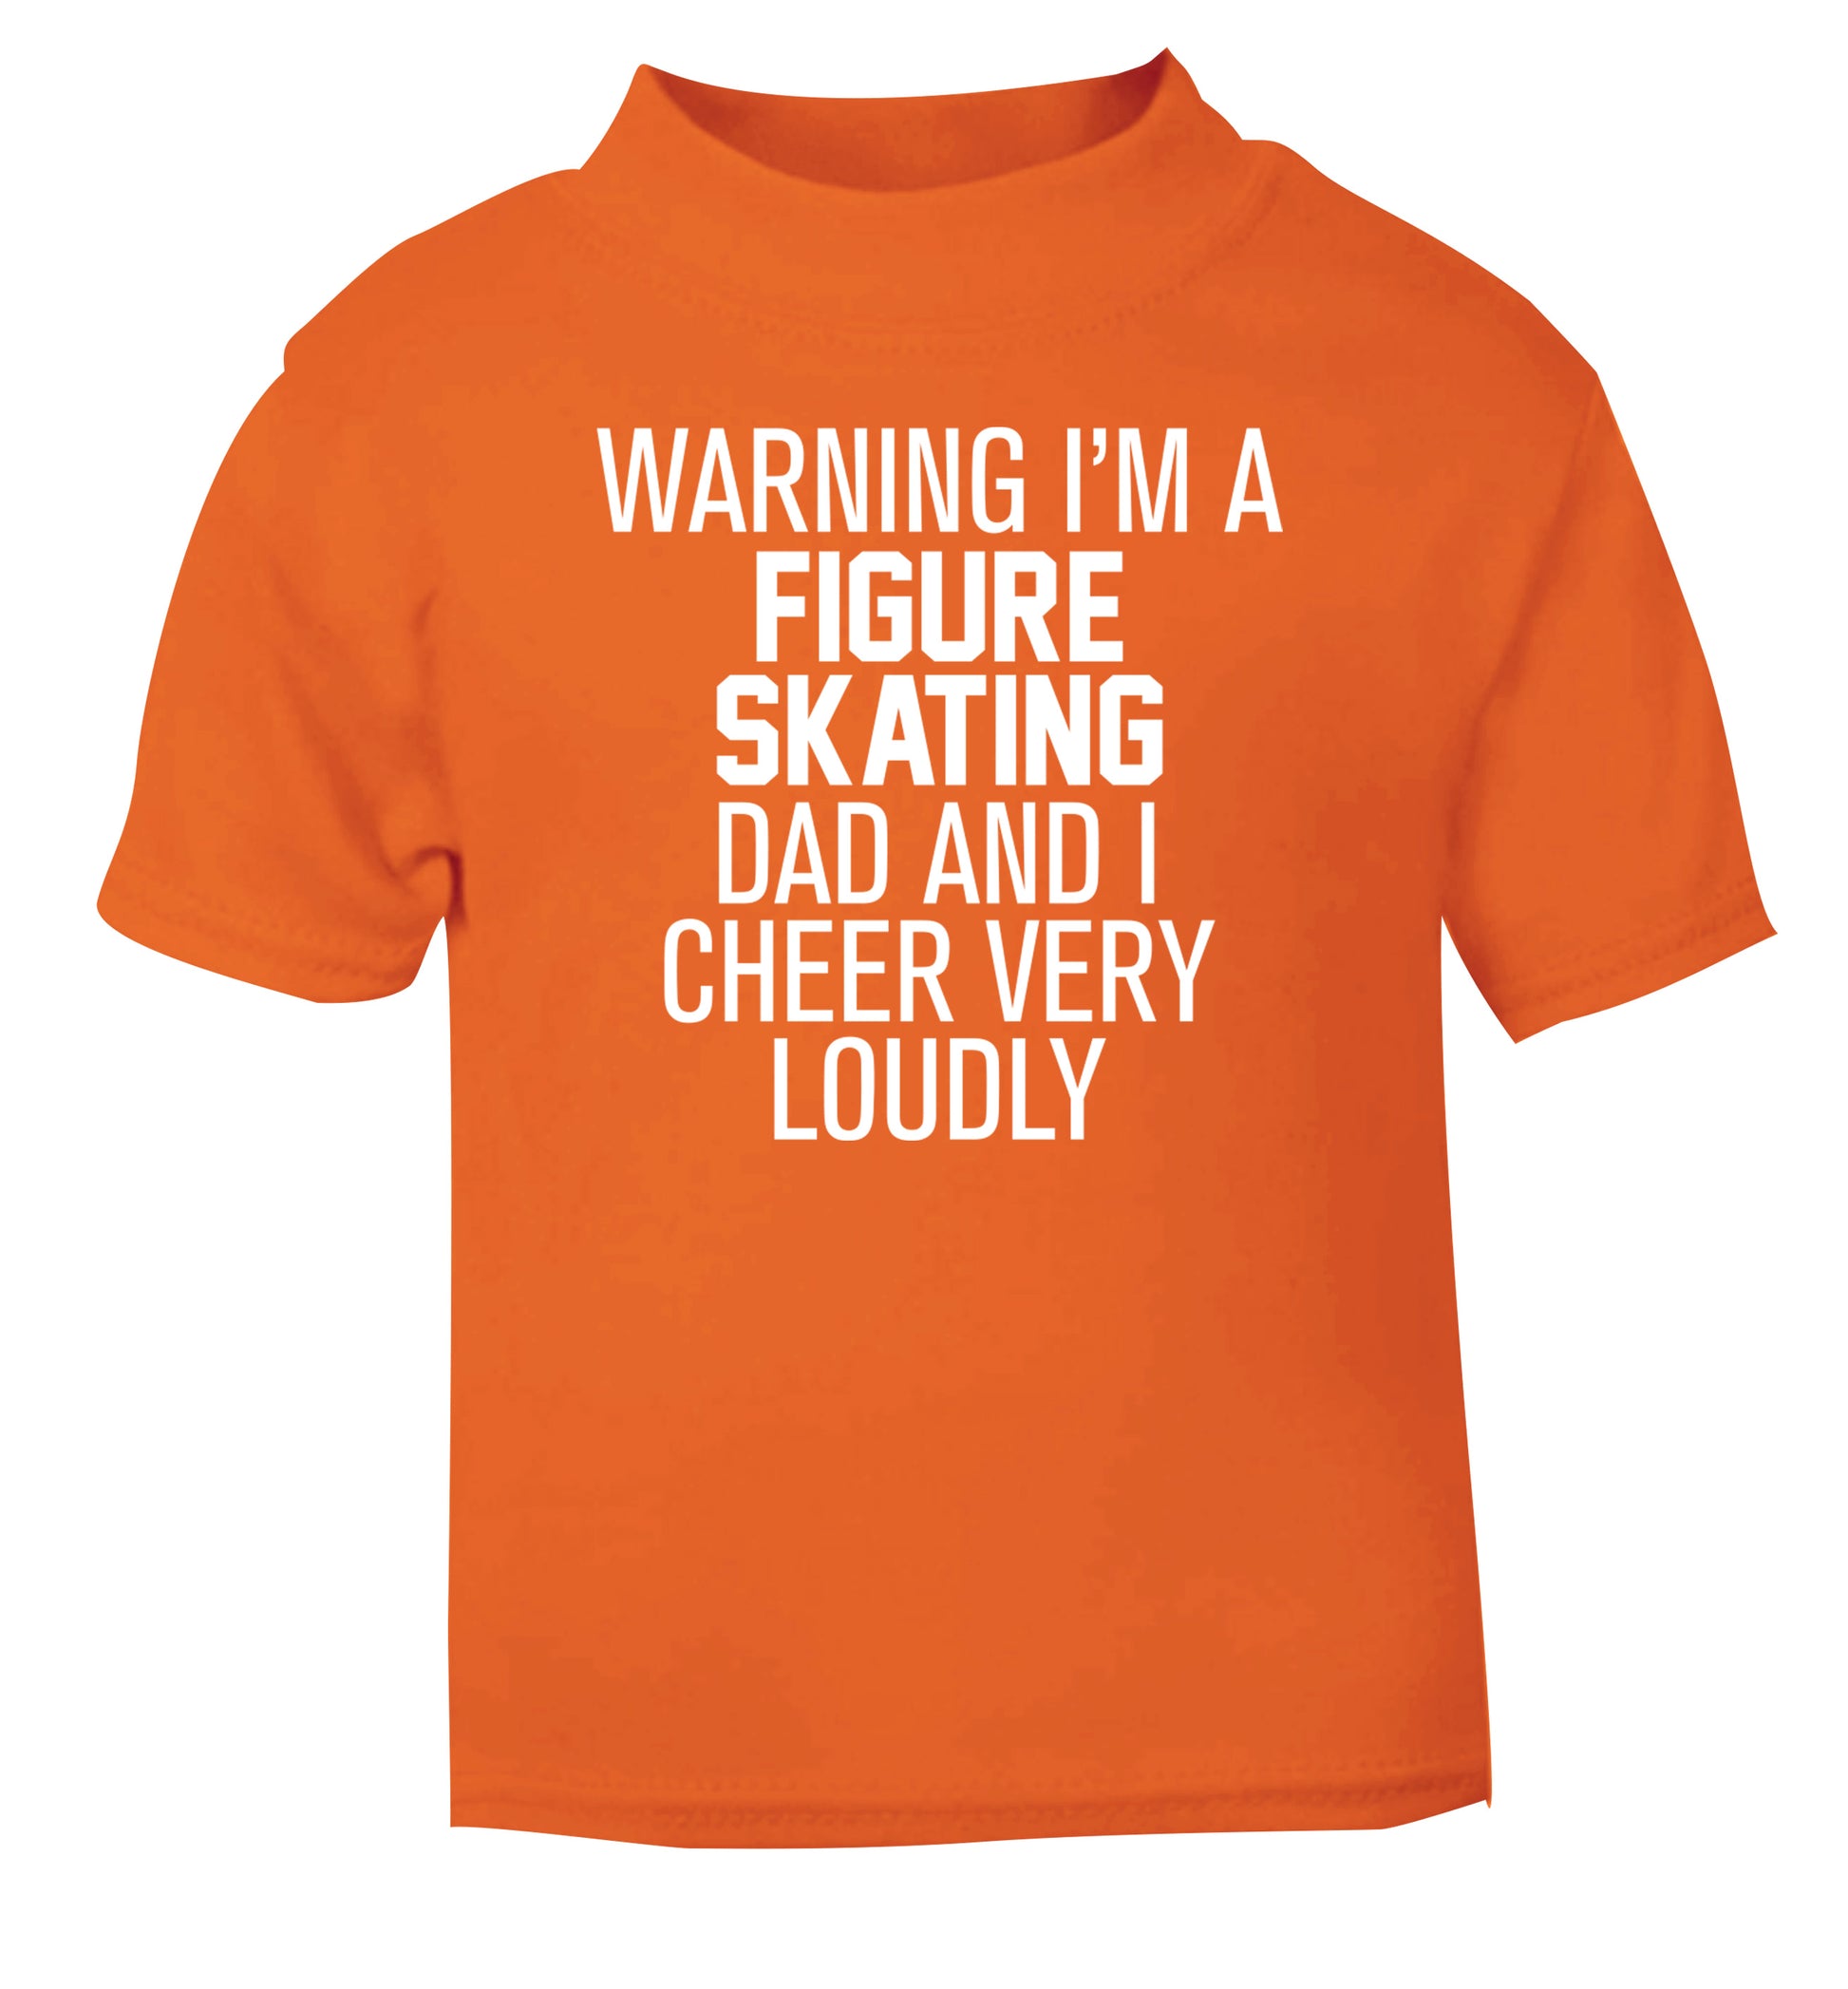 Warning I'm a figure skating dad and I cheer very loudly orange Baby Toddler Tshirt 2 Years